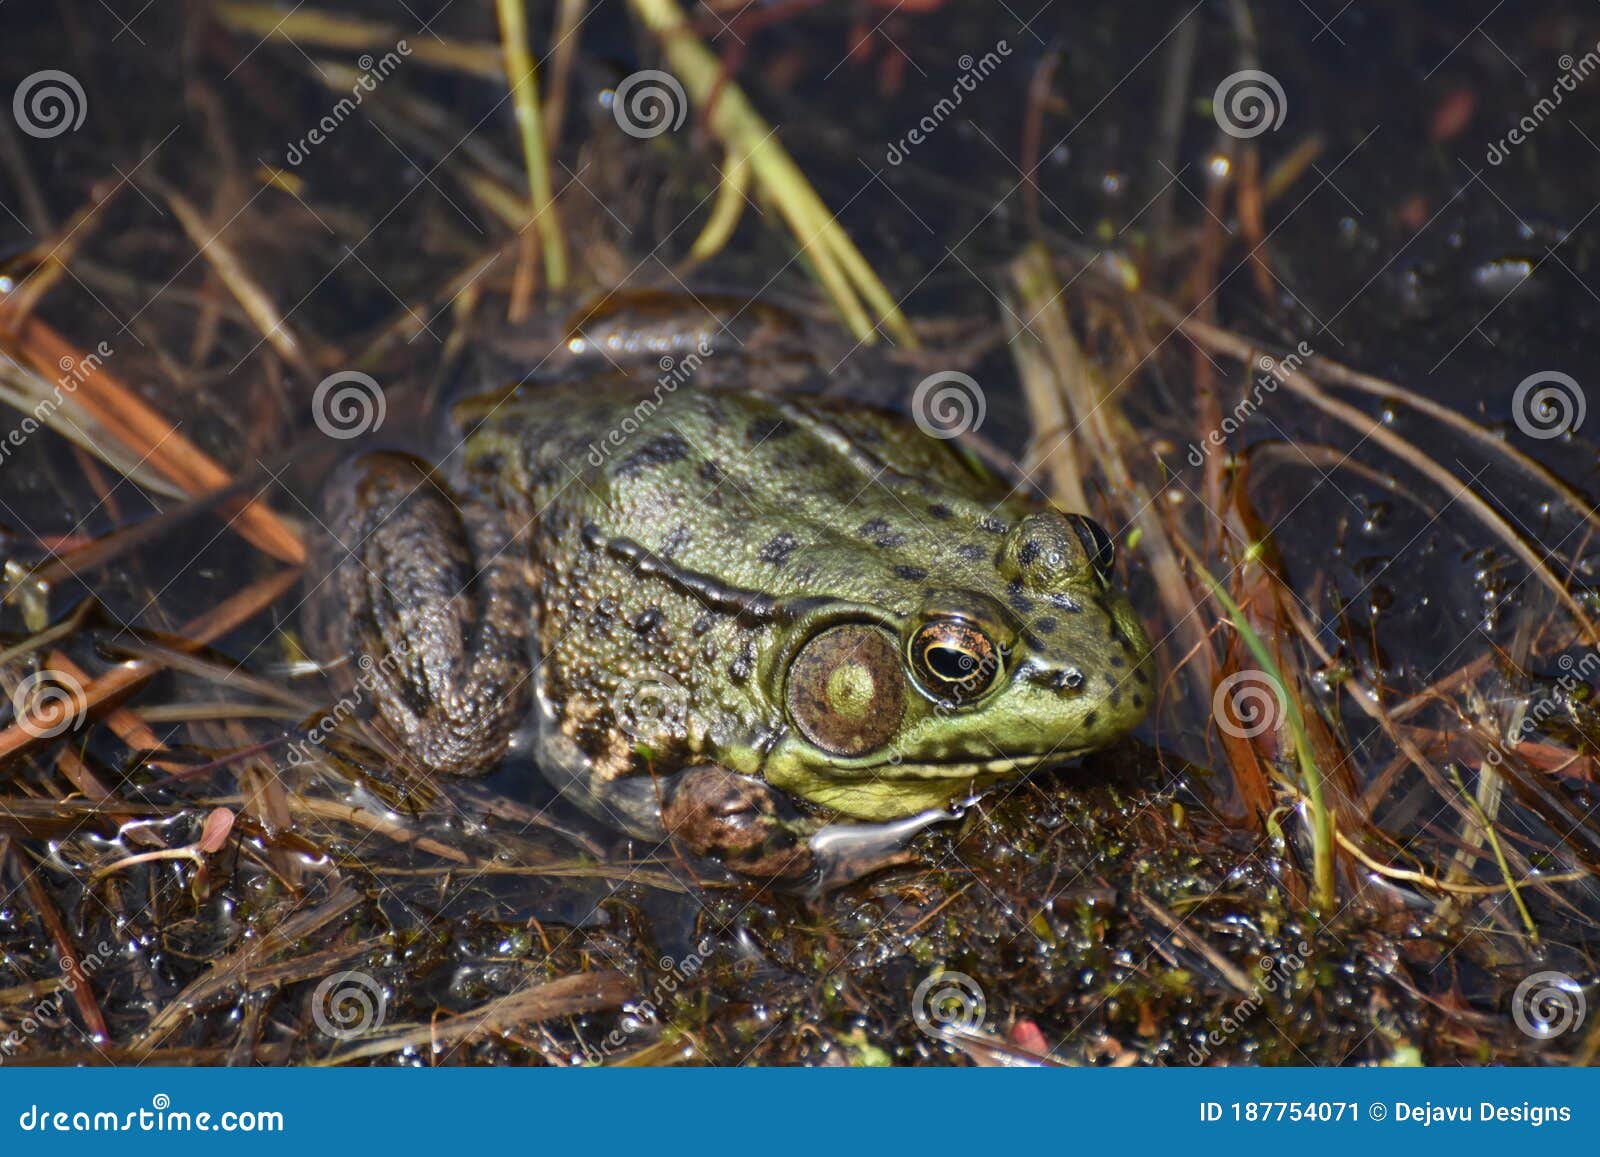 green frog in a wet quagmire and wetland